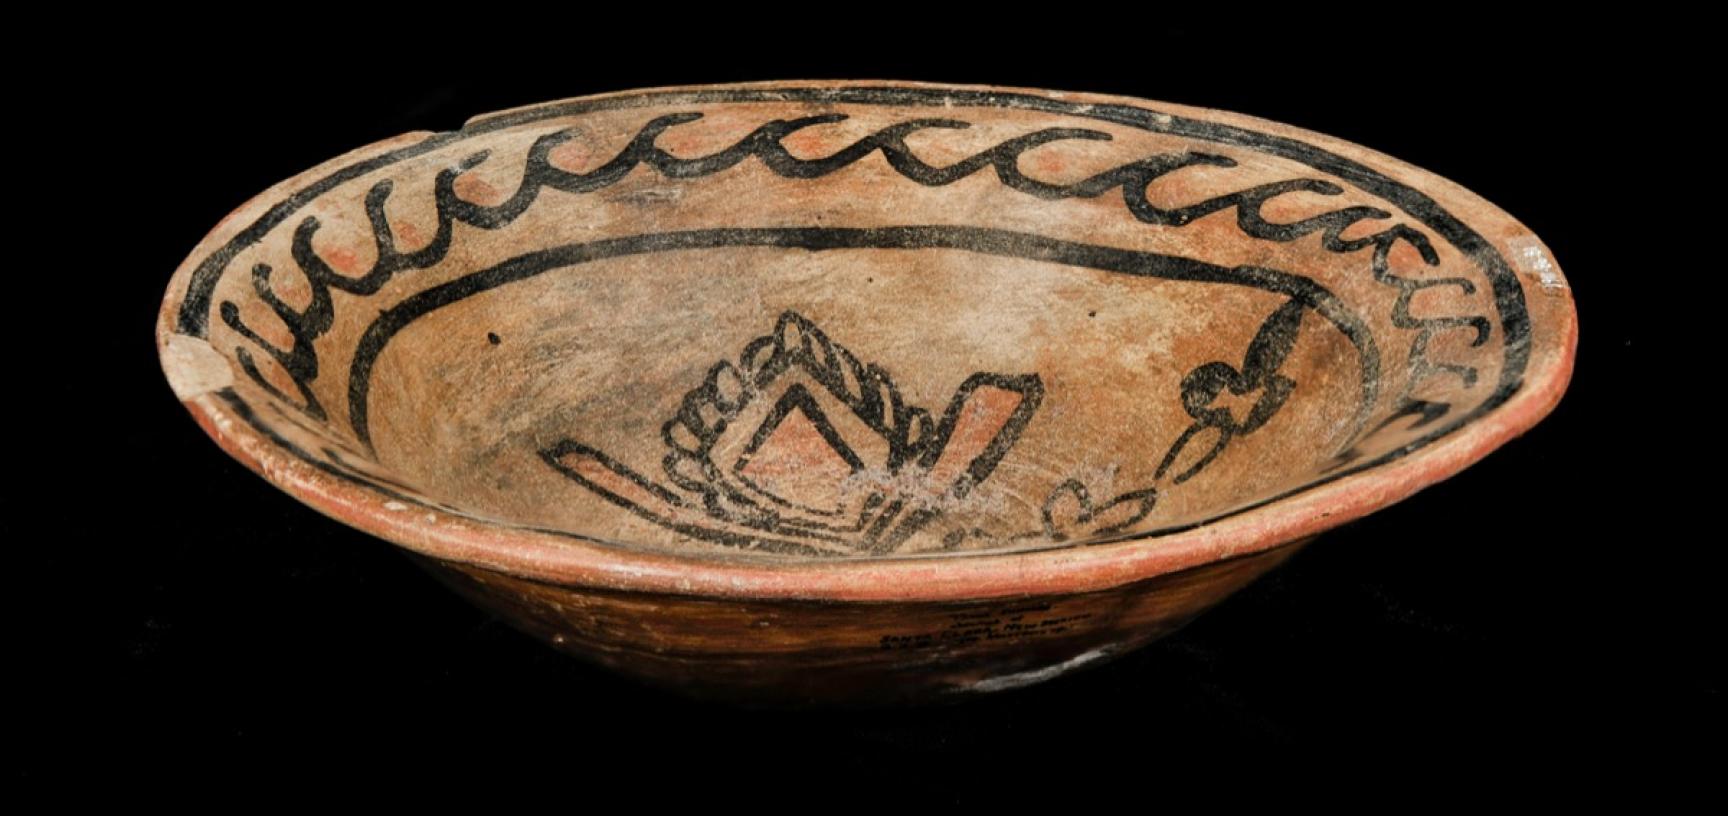 Worn red ceramic bowl with black designs on the inside